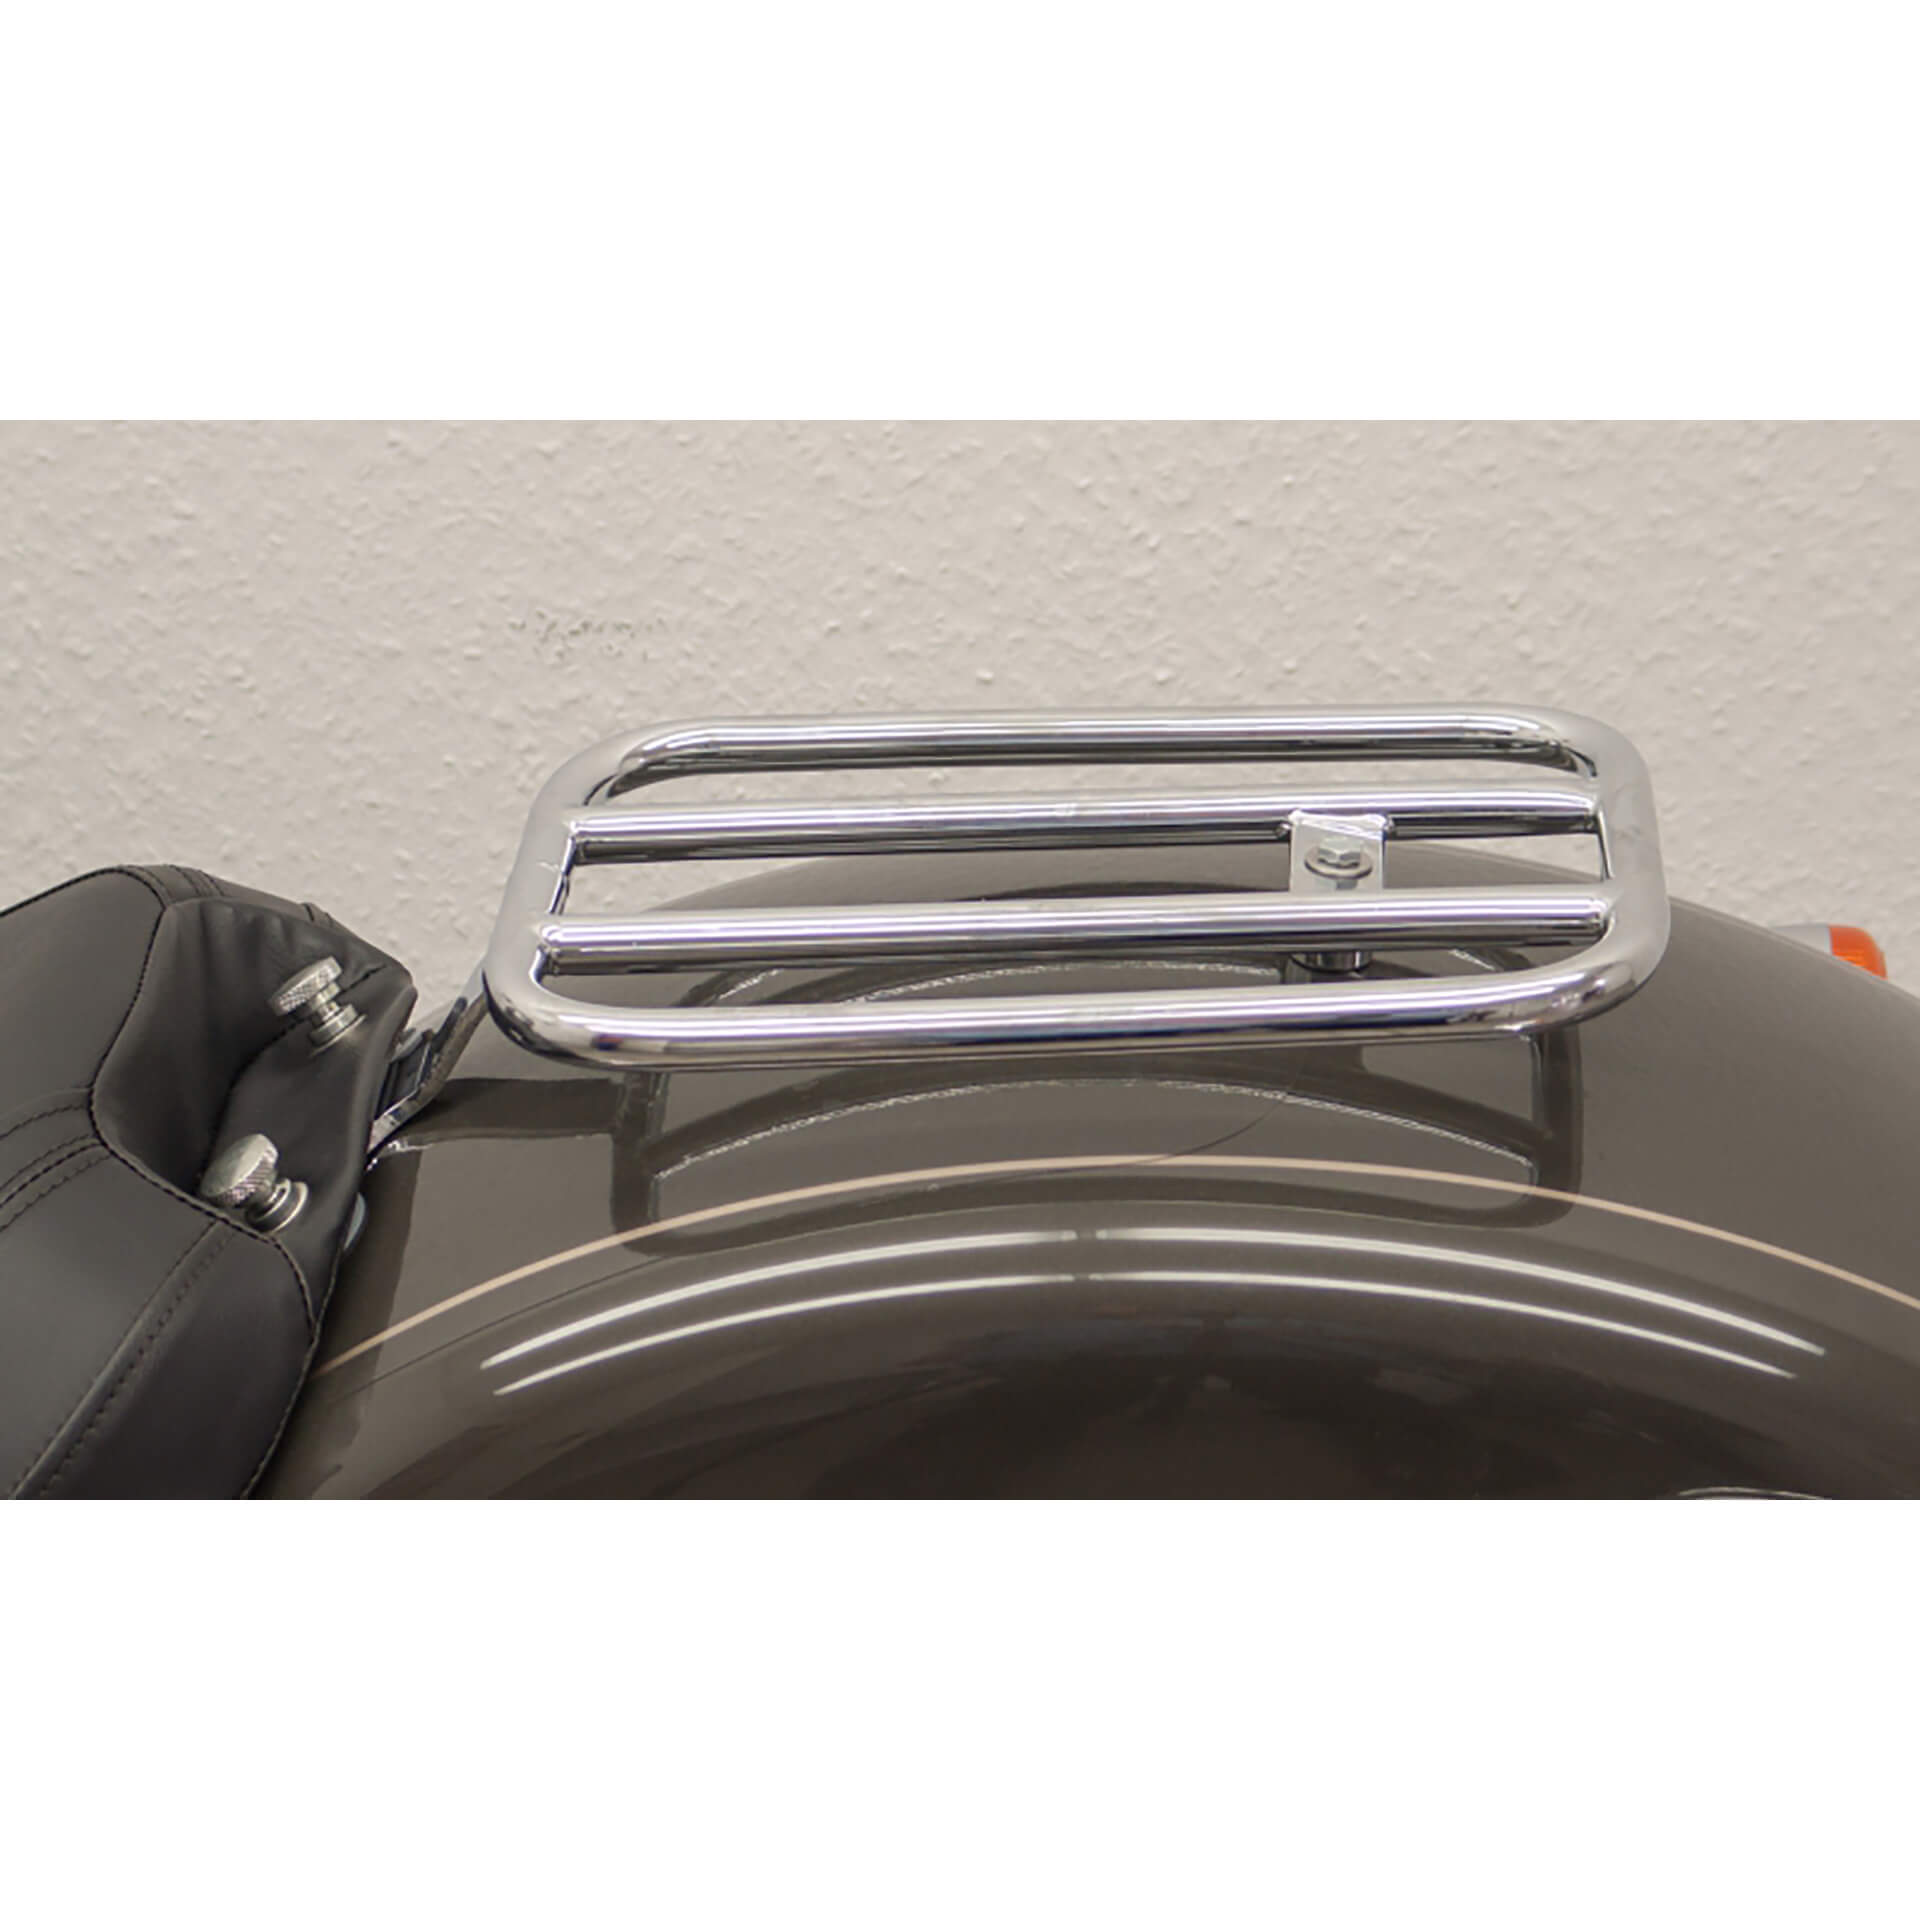 fehling Passenger Rack/Solorack HD Softail Deluxe/Softail Heritage Classic/Softail Fat Boy